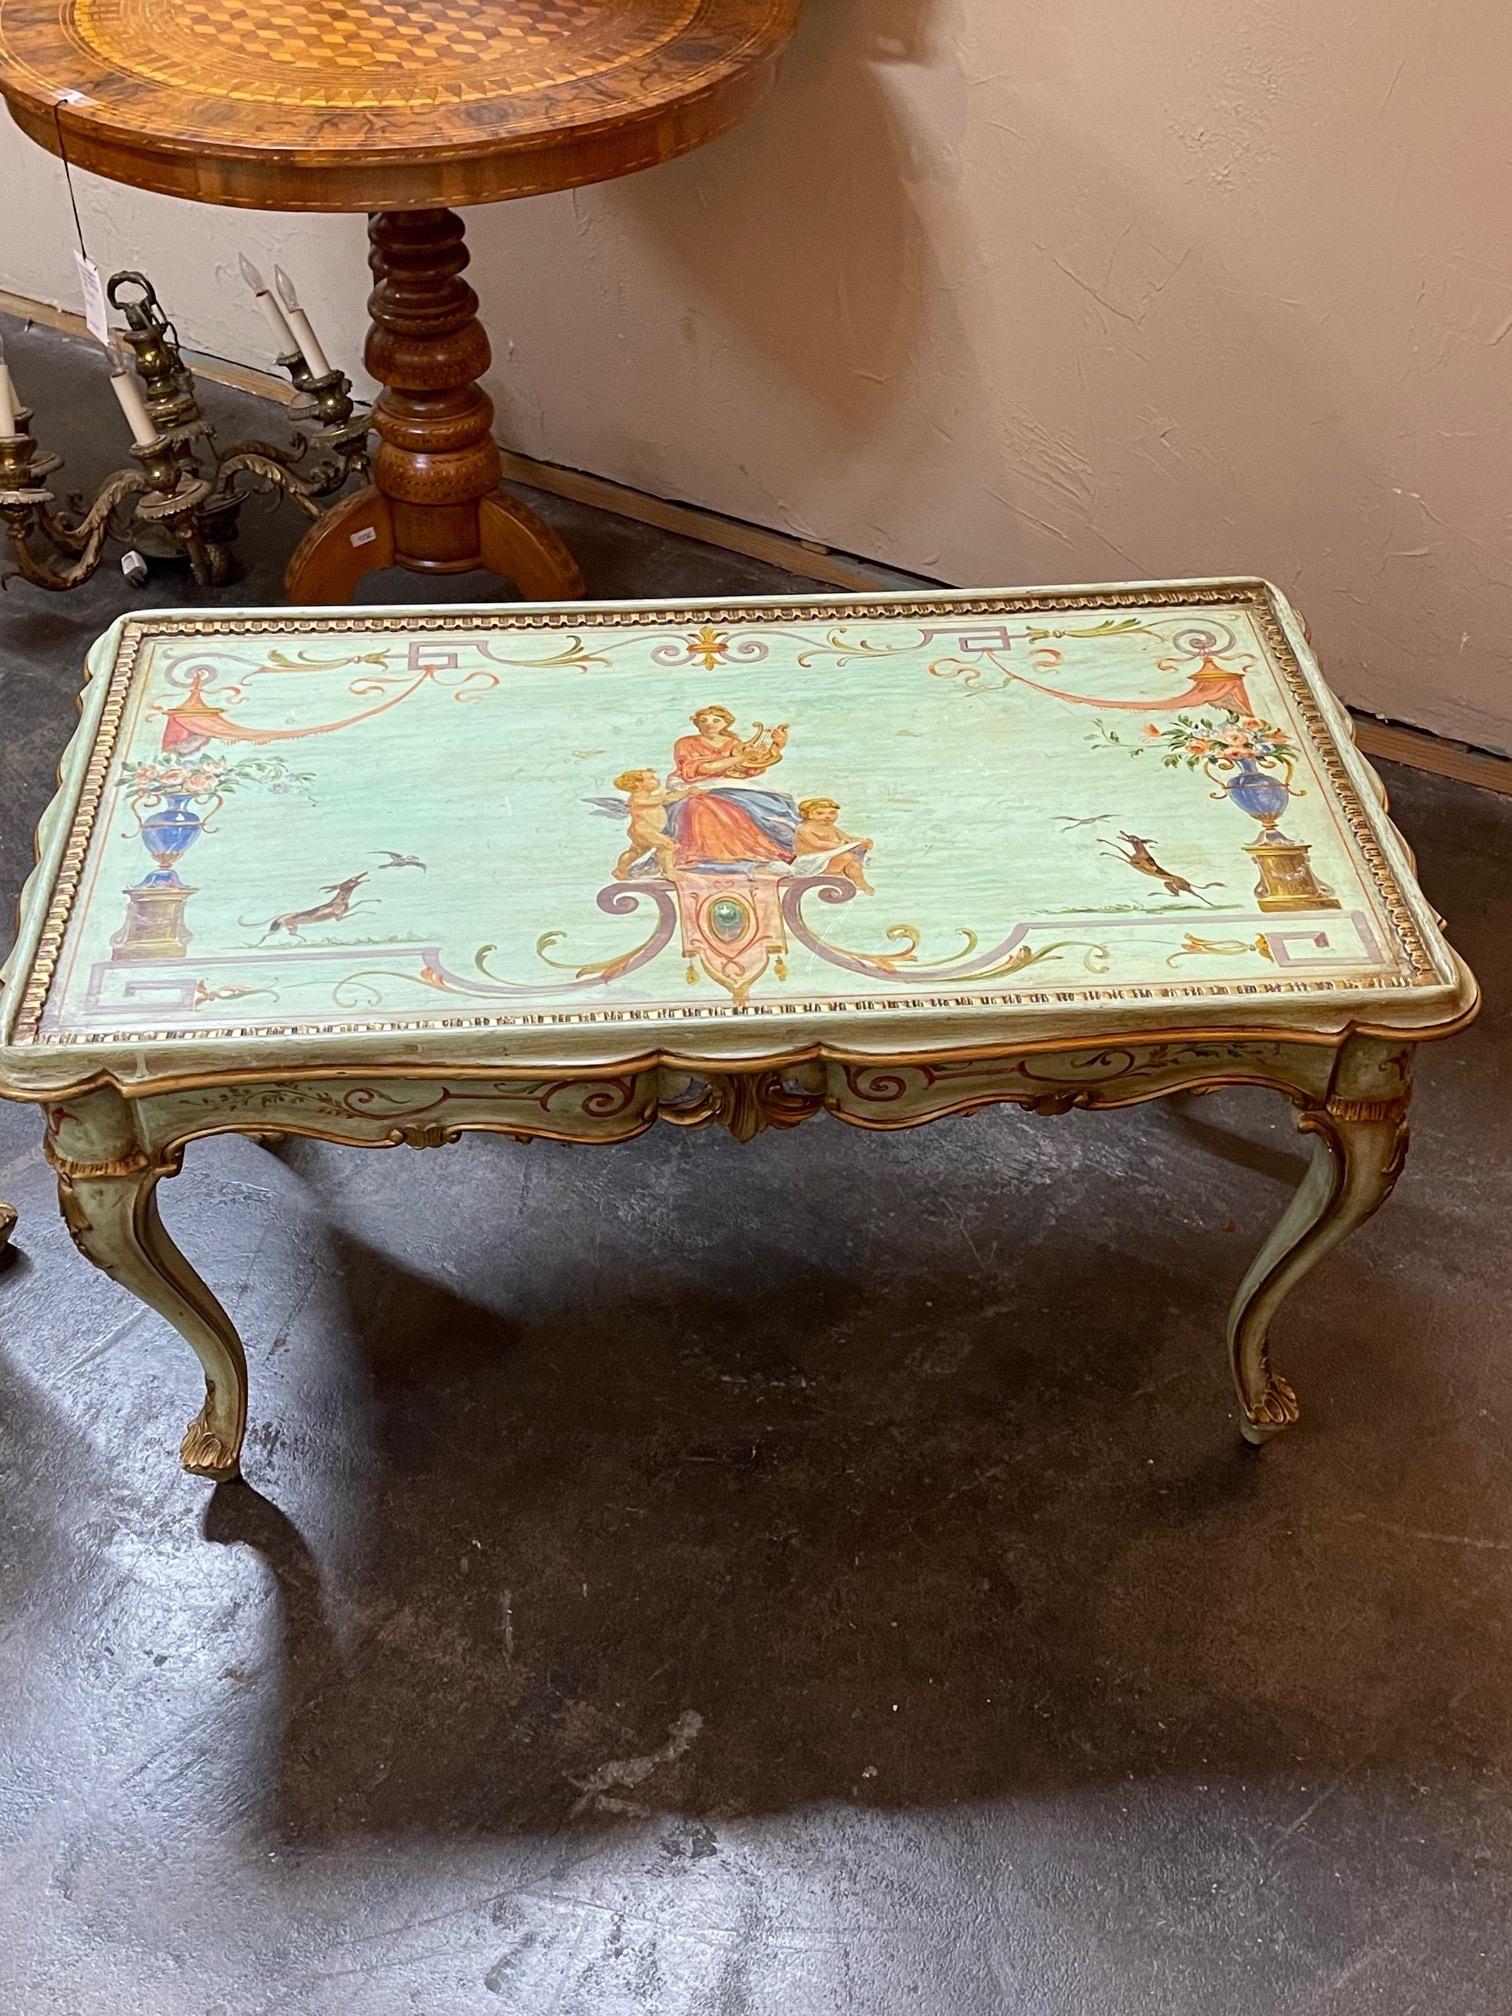 Decorative antique Venetian low tables. Hand painted with classical designs in the colors of green, orange, blue and green. Nice shape and pretty carving as well. Note: price listed is for one.